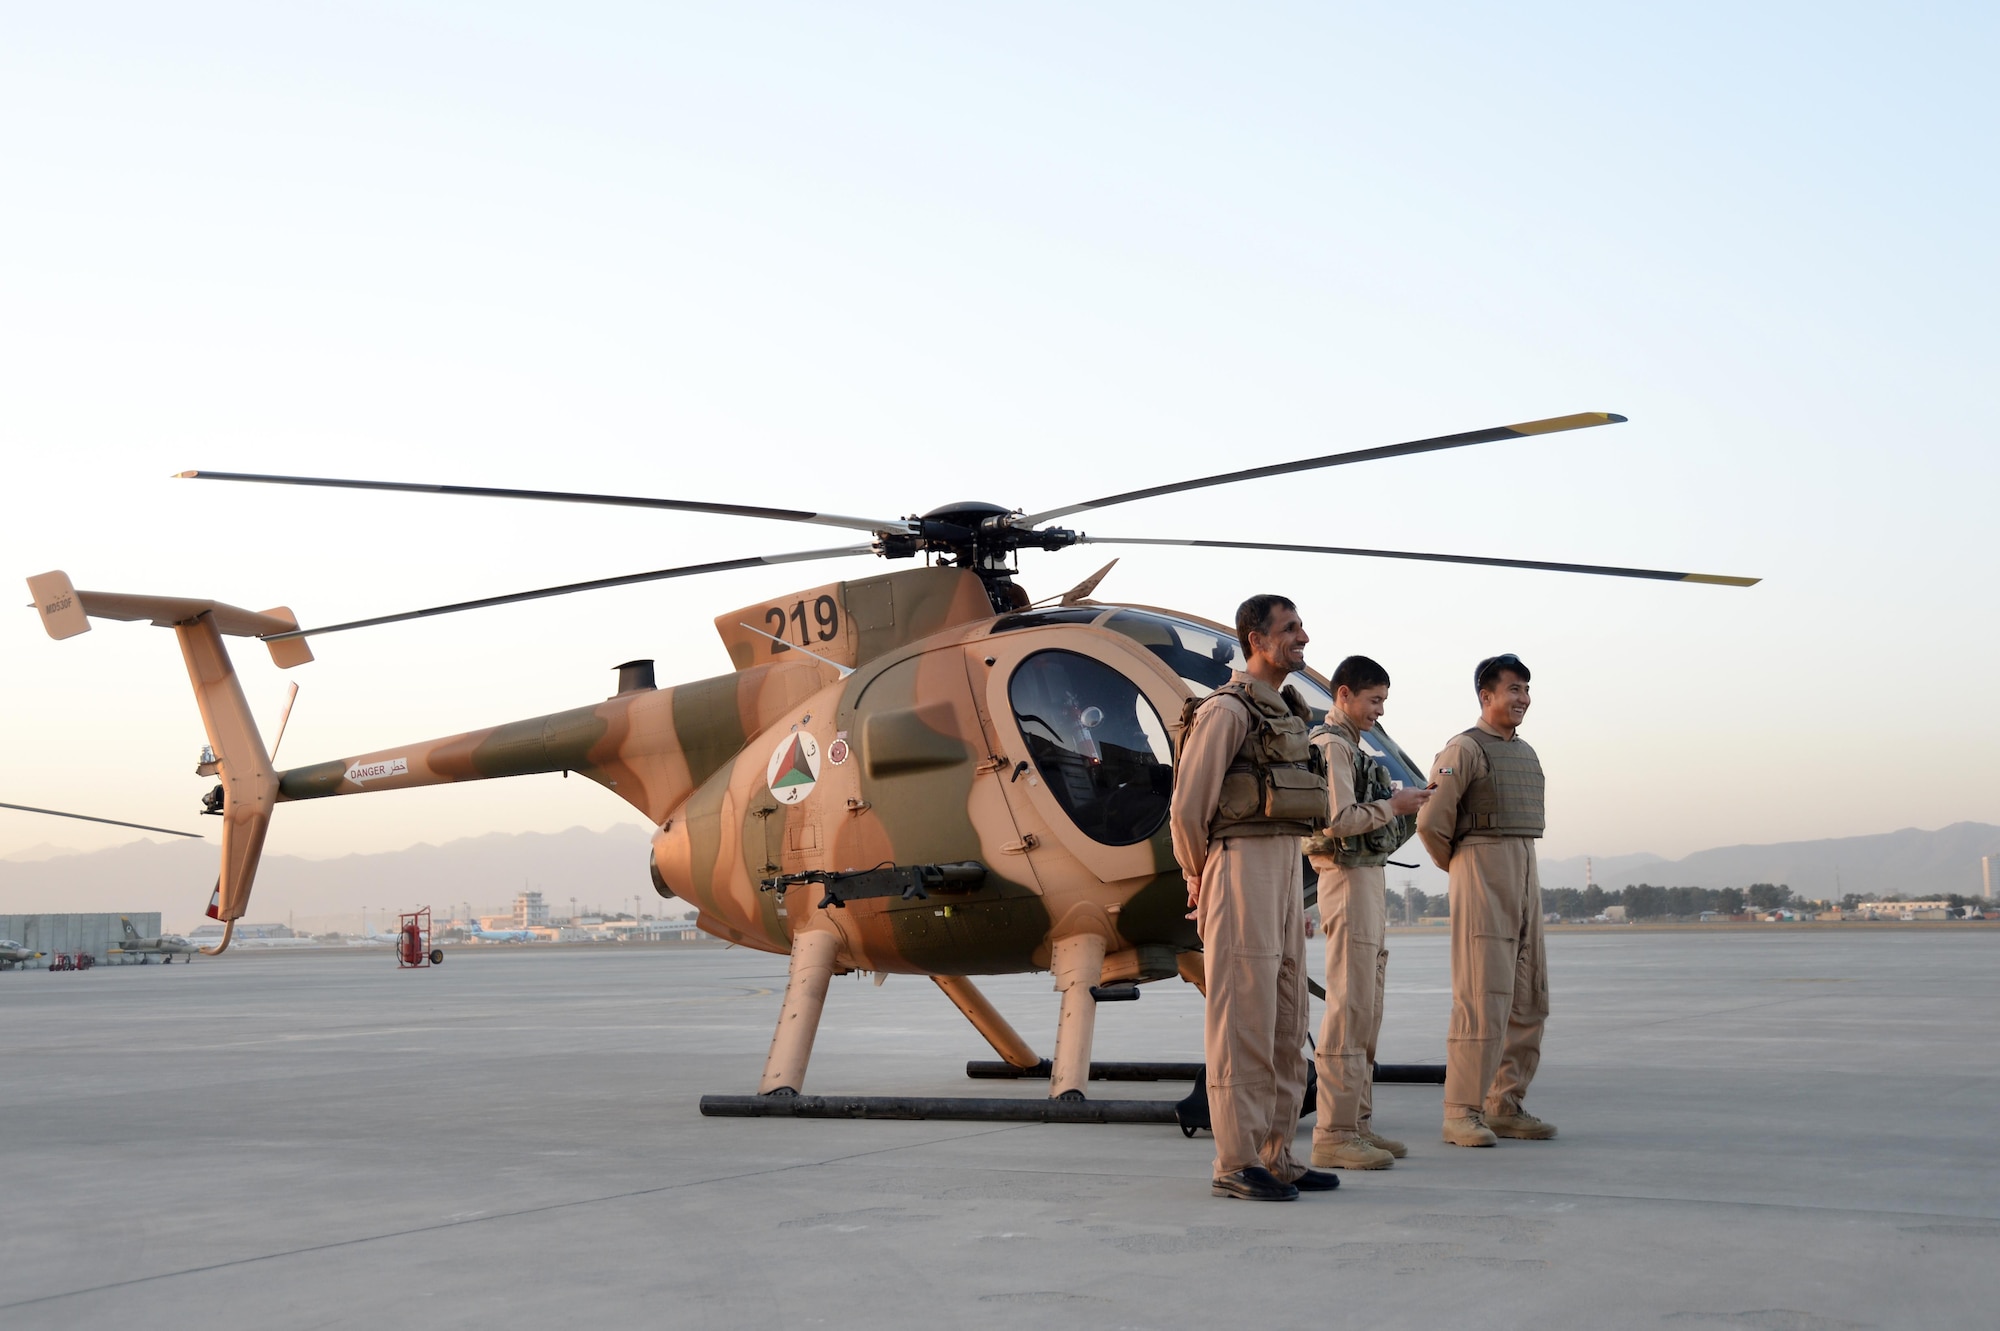 Afghan Air Force pilots standby prior to an all-Afghan combat mission where they took off for Helmand Province. The crews flew out of Hamid Karzai International Airport, Kabul, Afghanistan, Sept. 27, 2015. (U.S. Air Force photo by Staff Sgt. Sandra Welch/released)